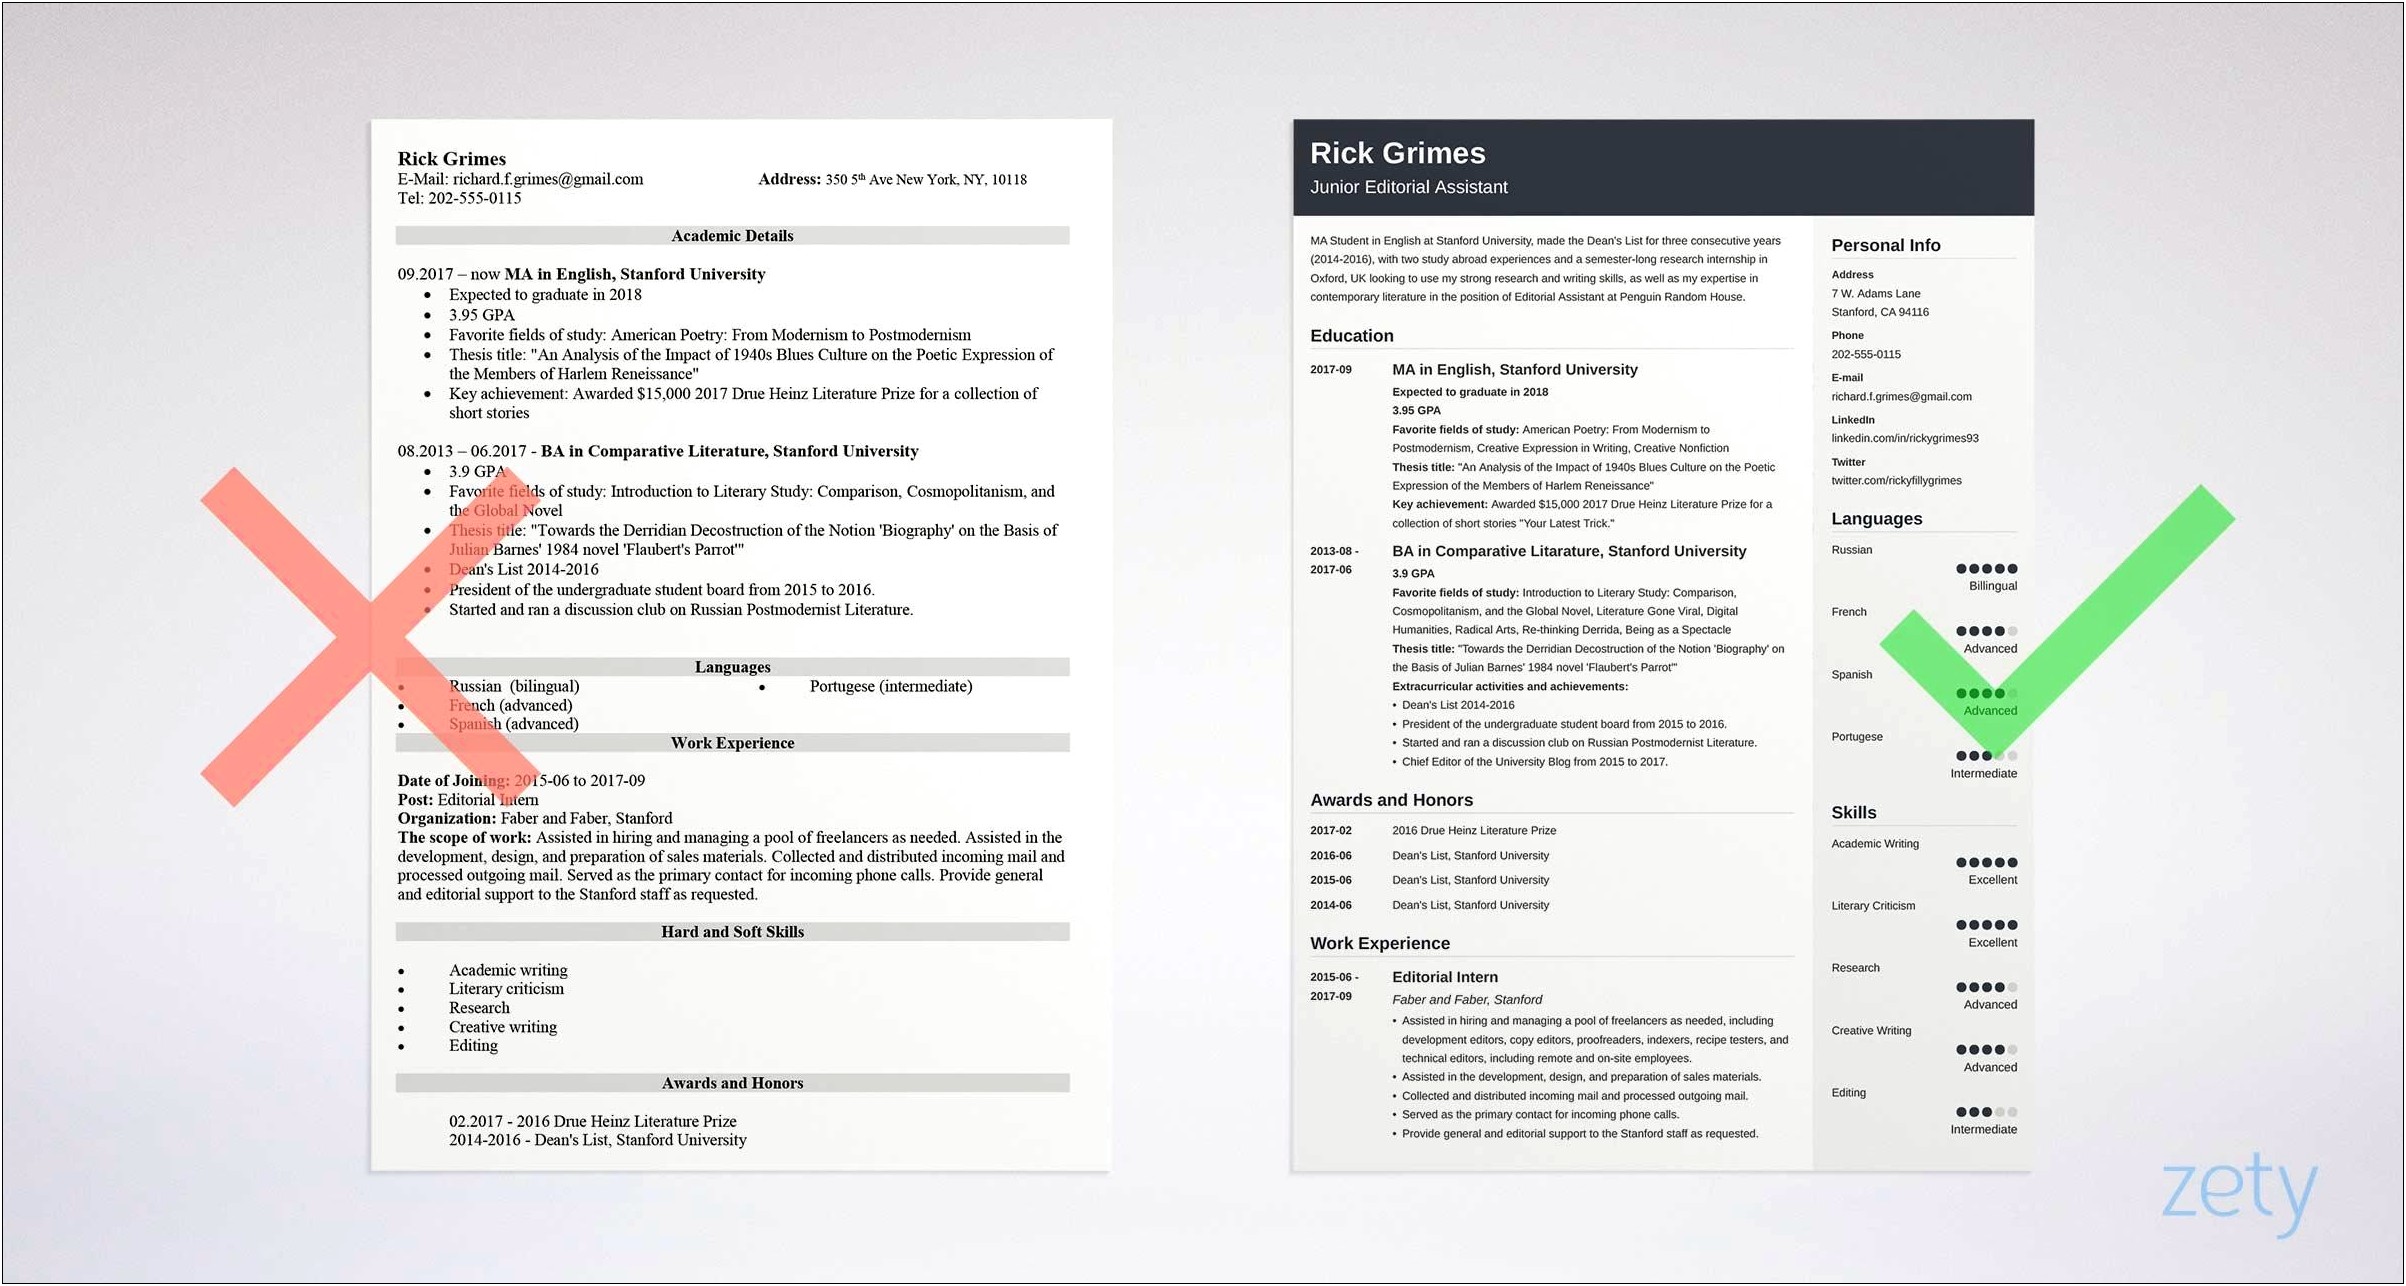 Sample Resume For Bus Driver With No Experience